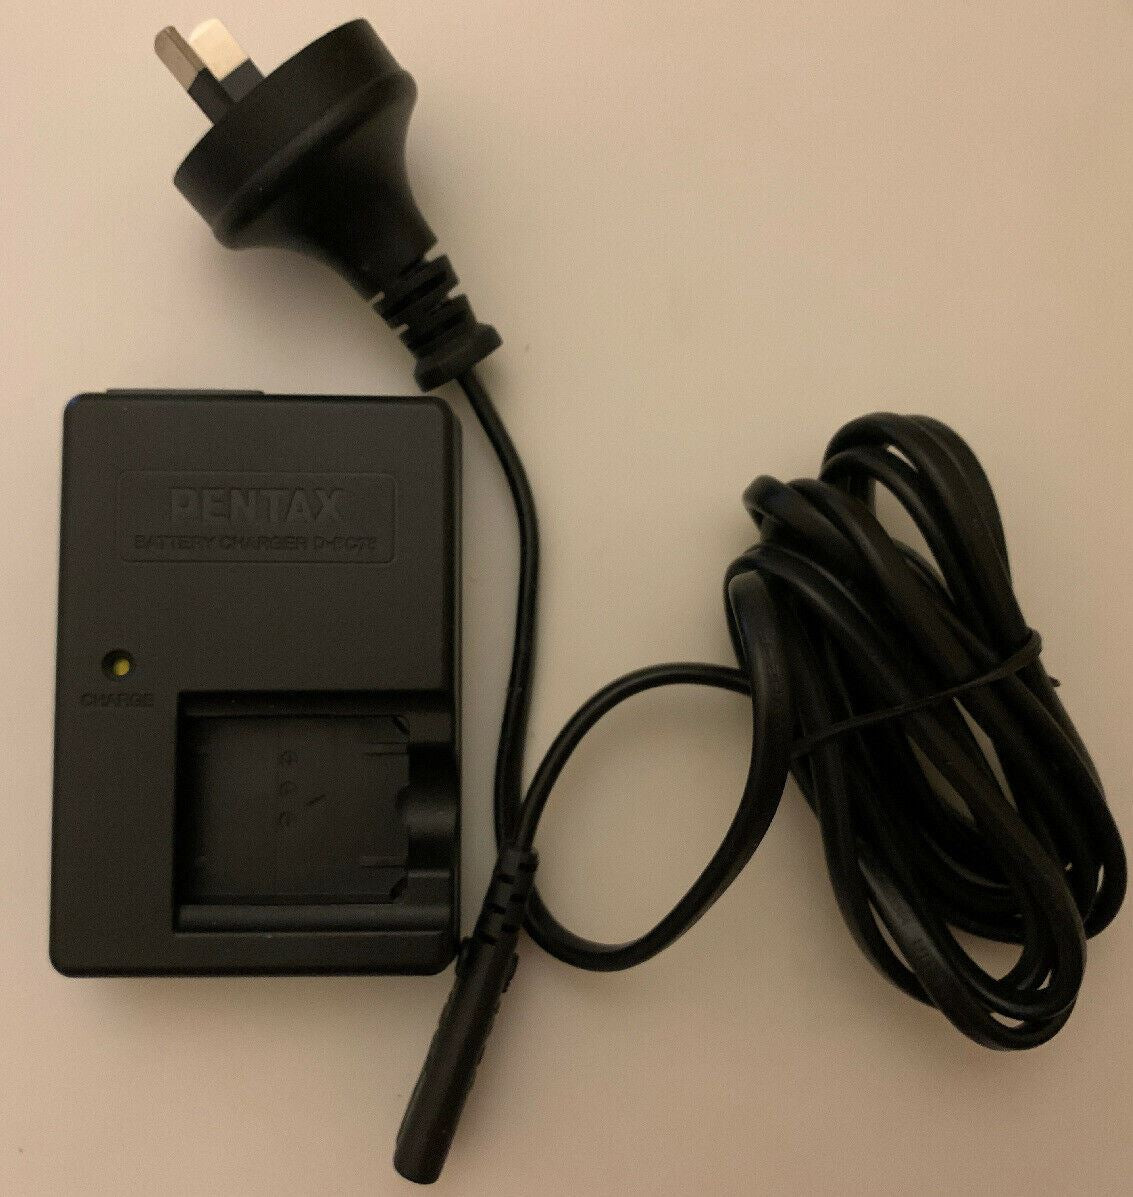 Pentax Battery Charger D-BC78 for Pentax Optio M60 V20 W60 W80